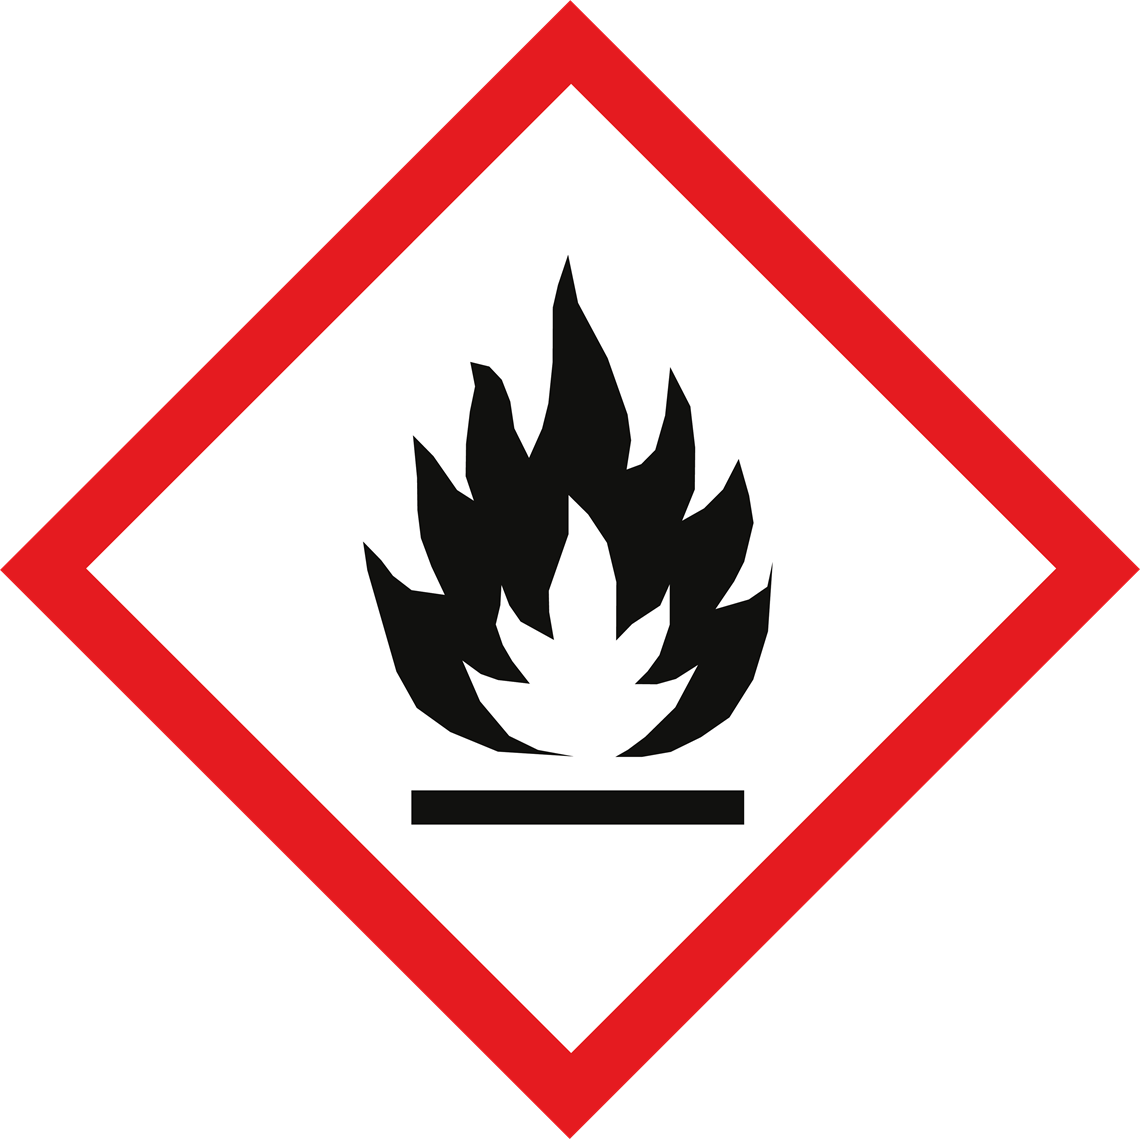 Picture of Warning Label - Flammable